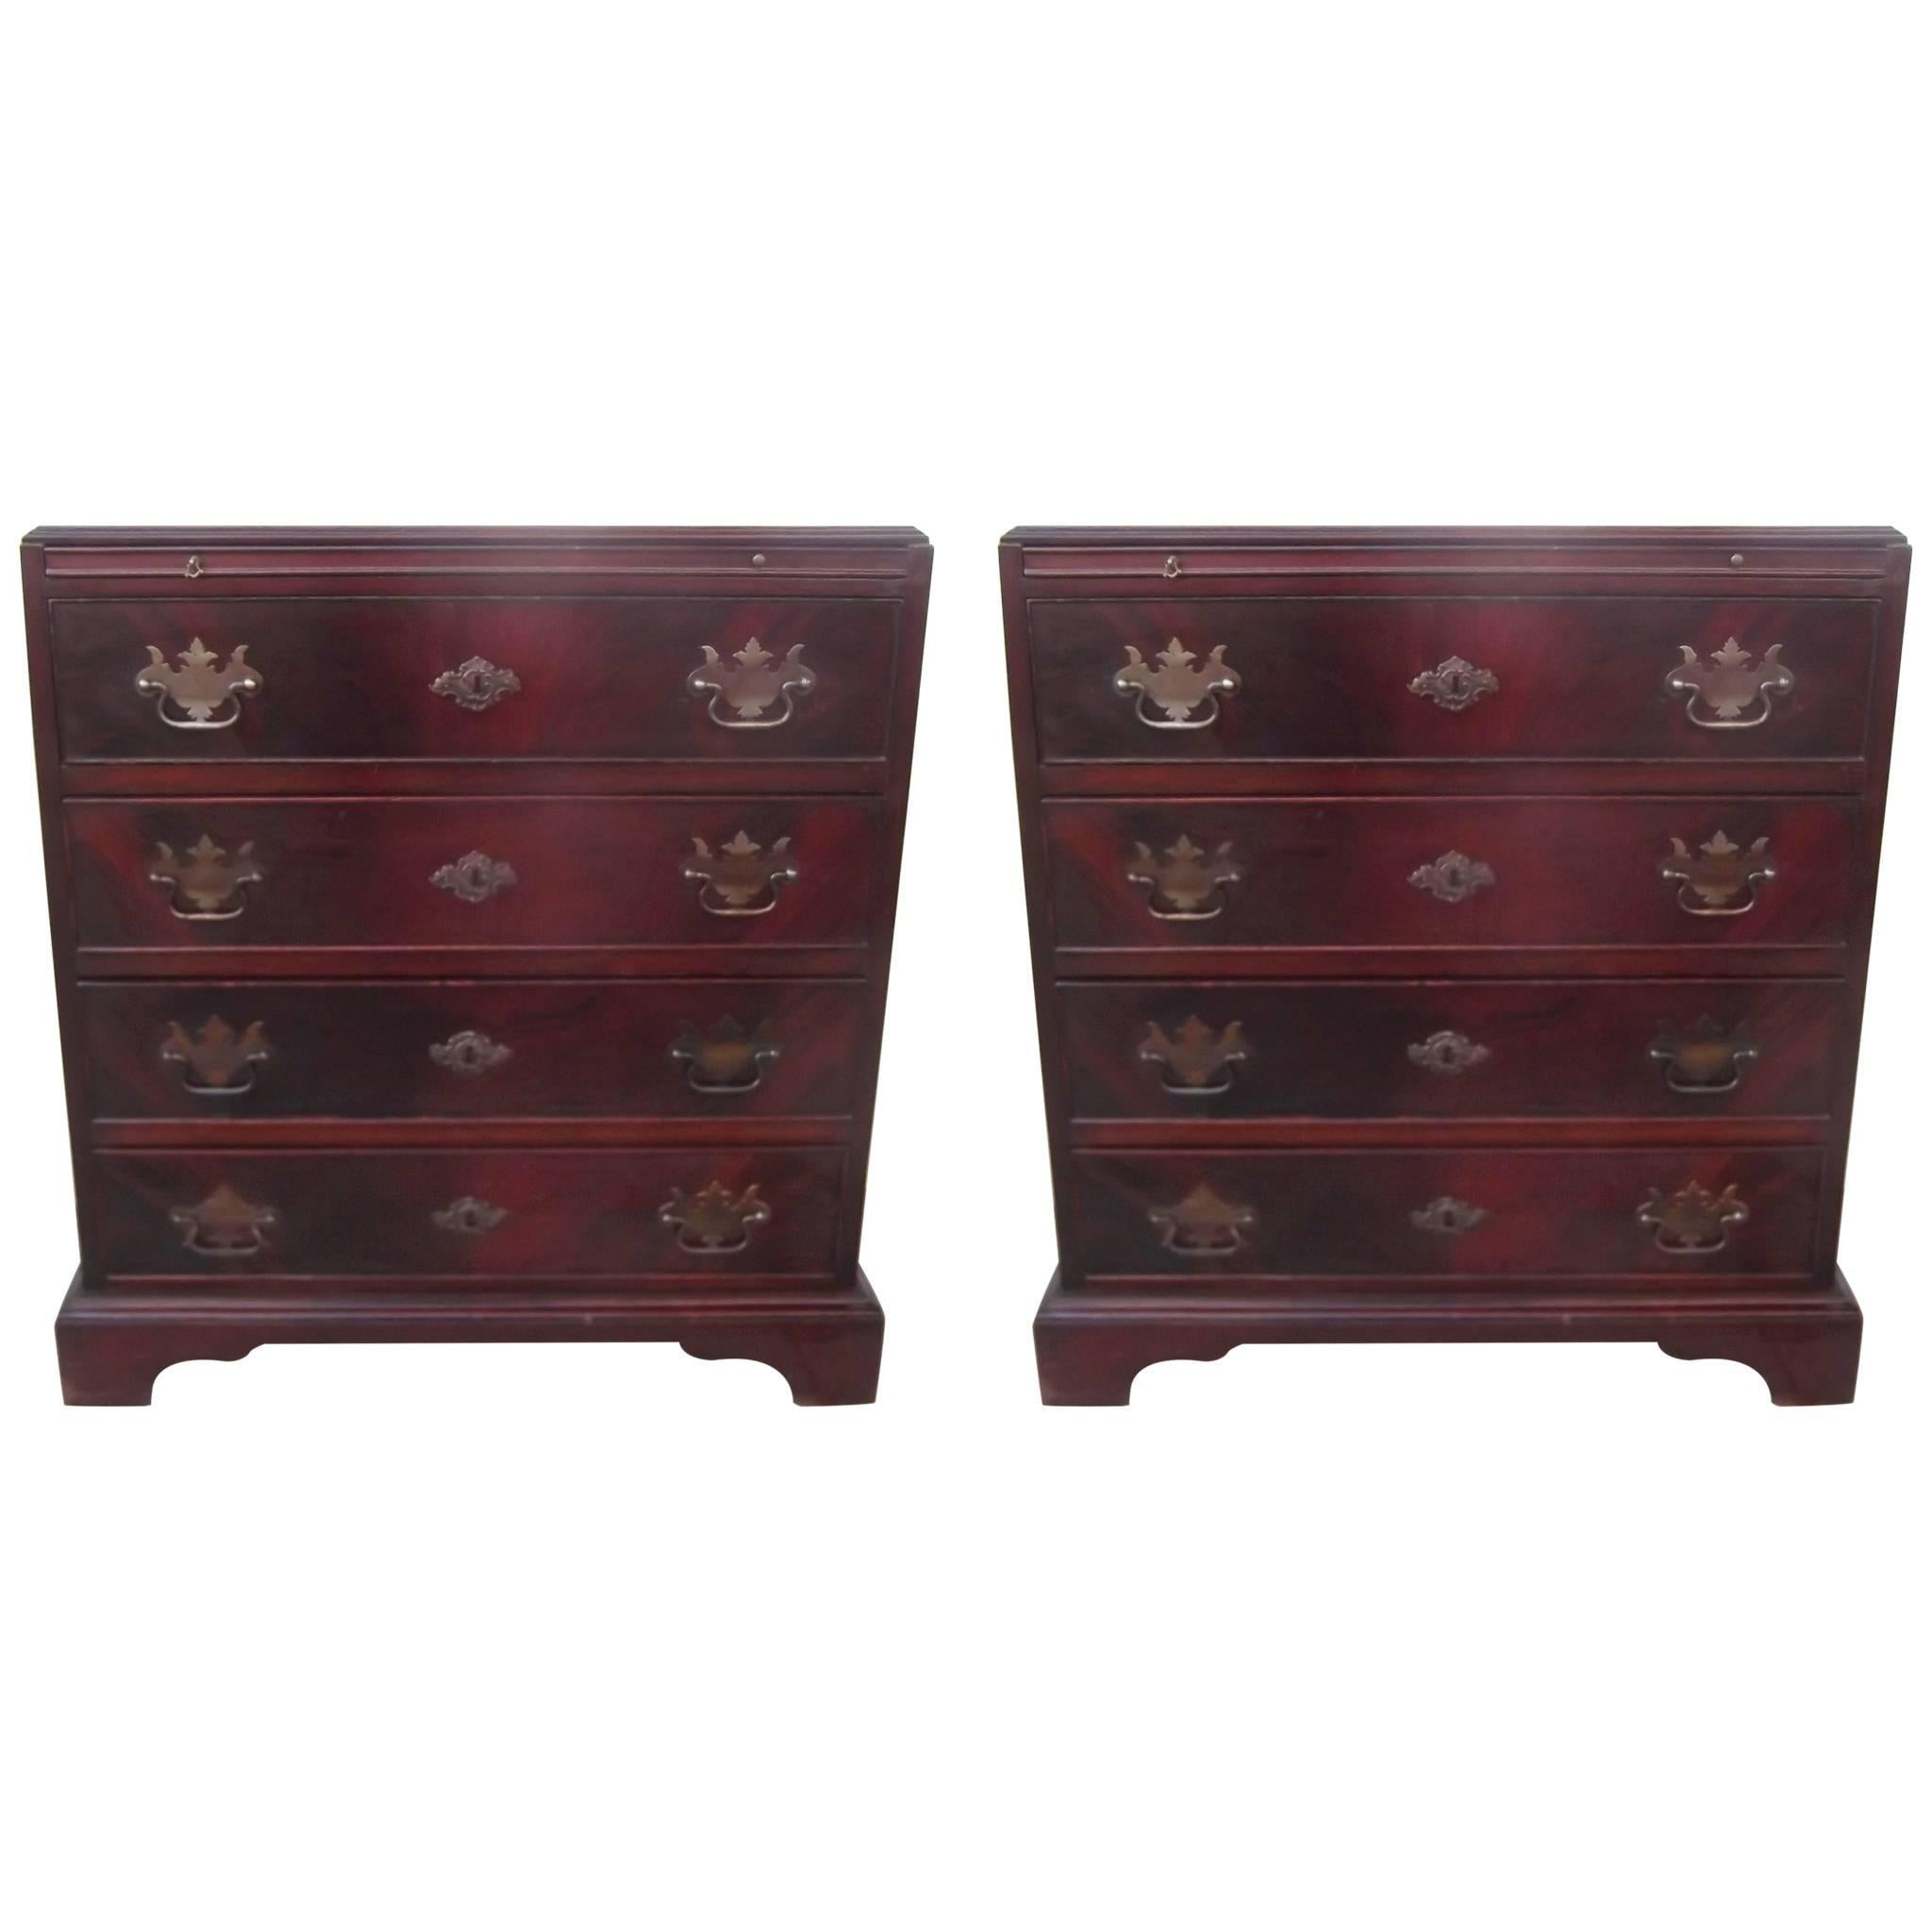 Pair of Mahogany Bachelors Chests Night Stands